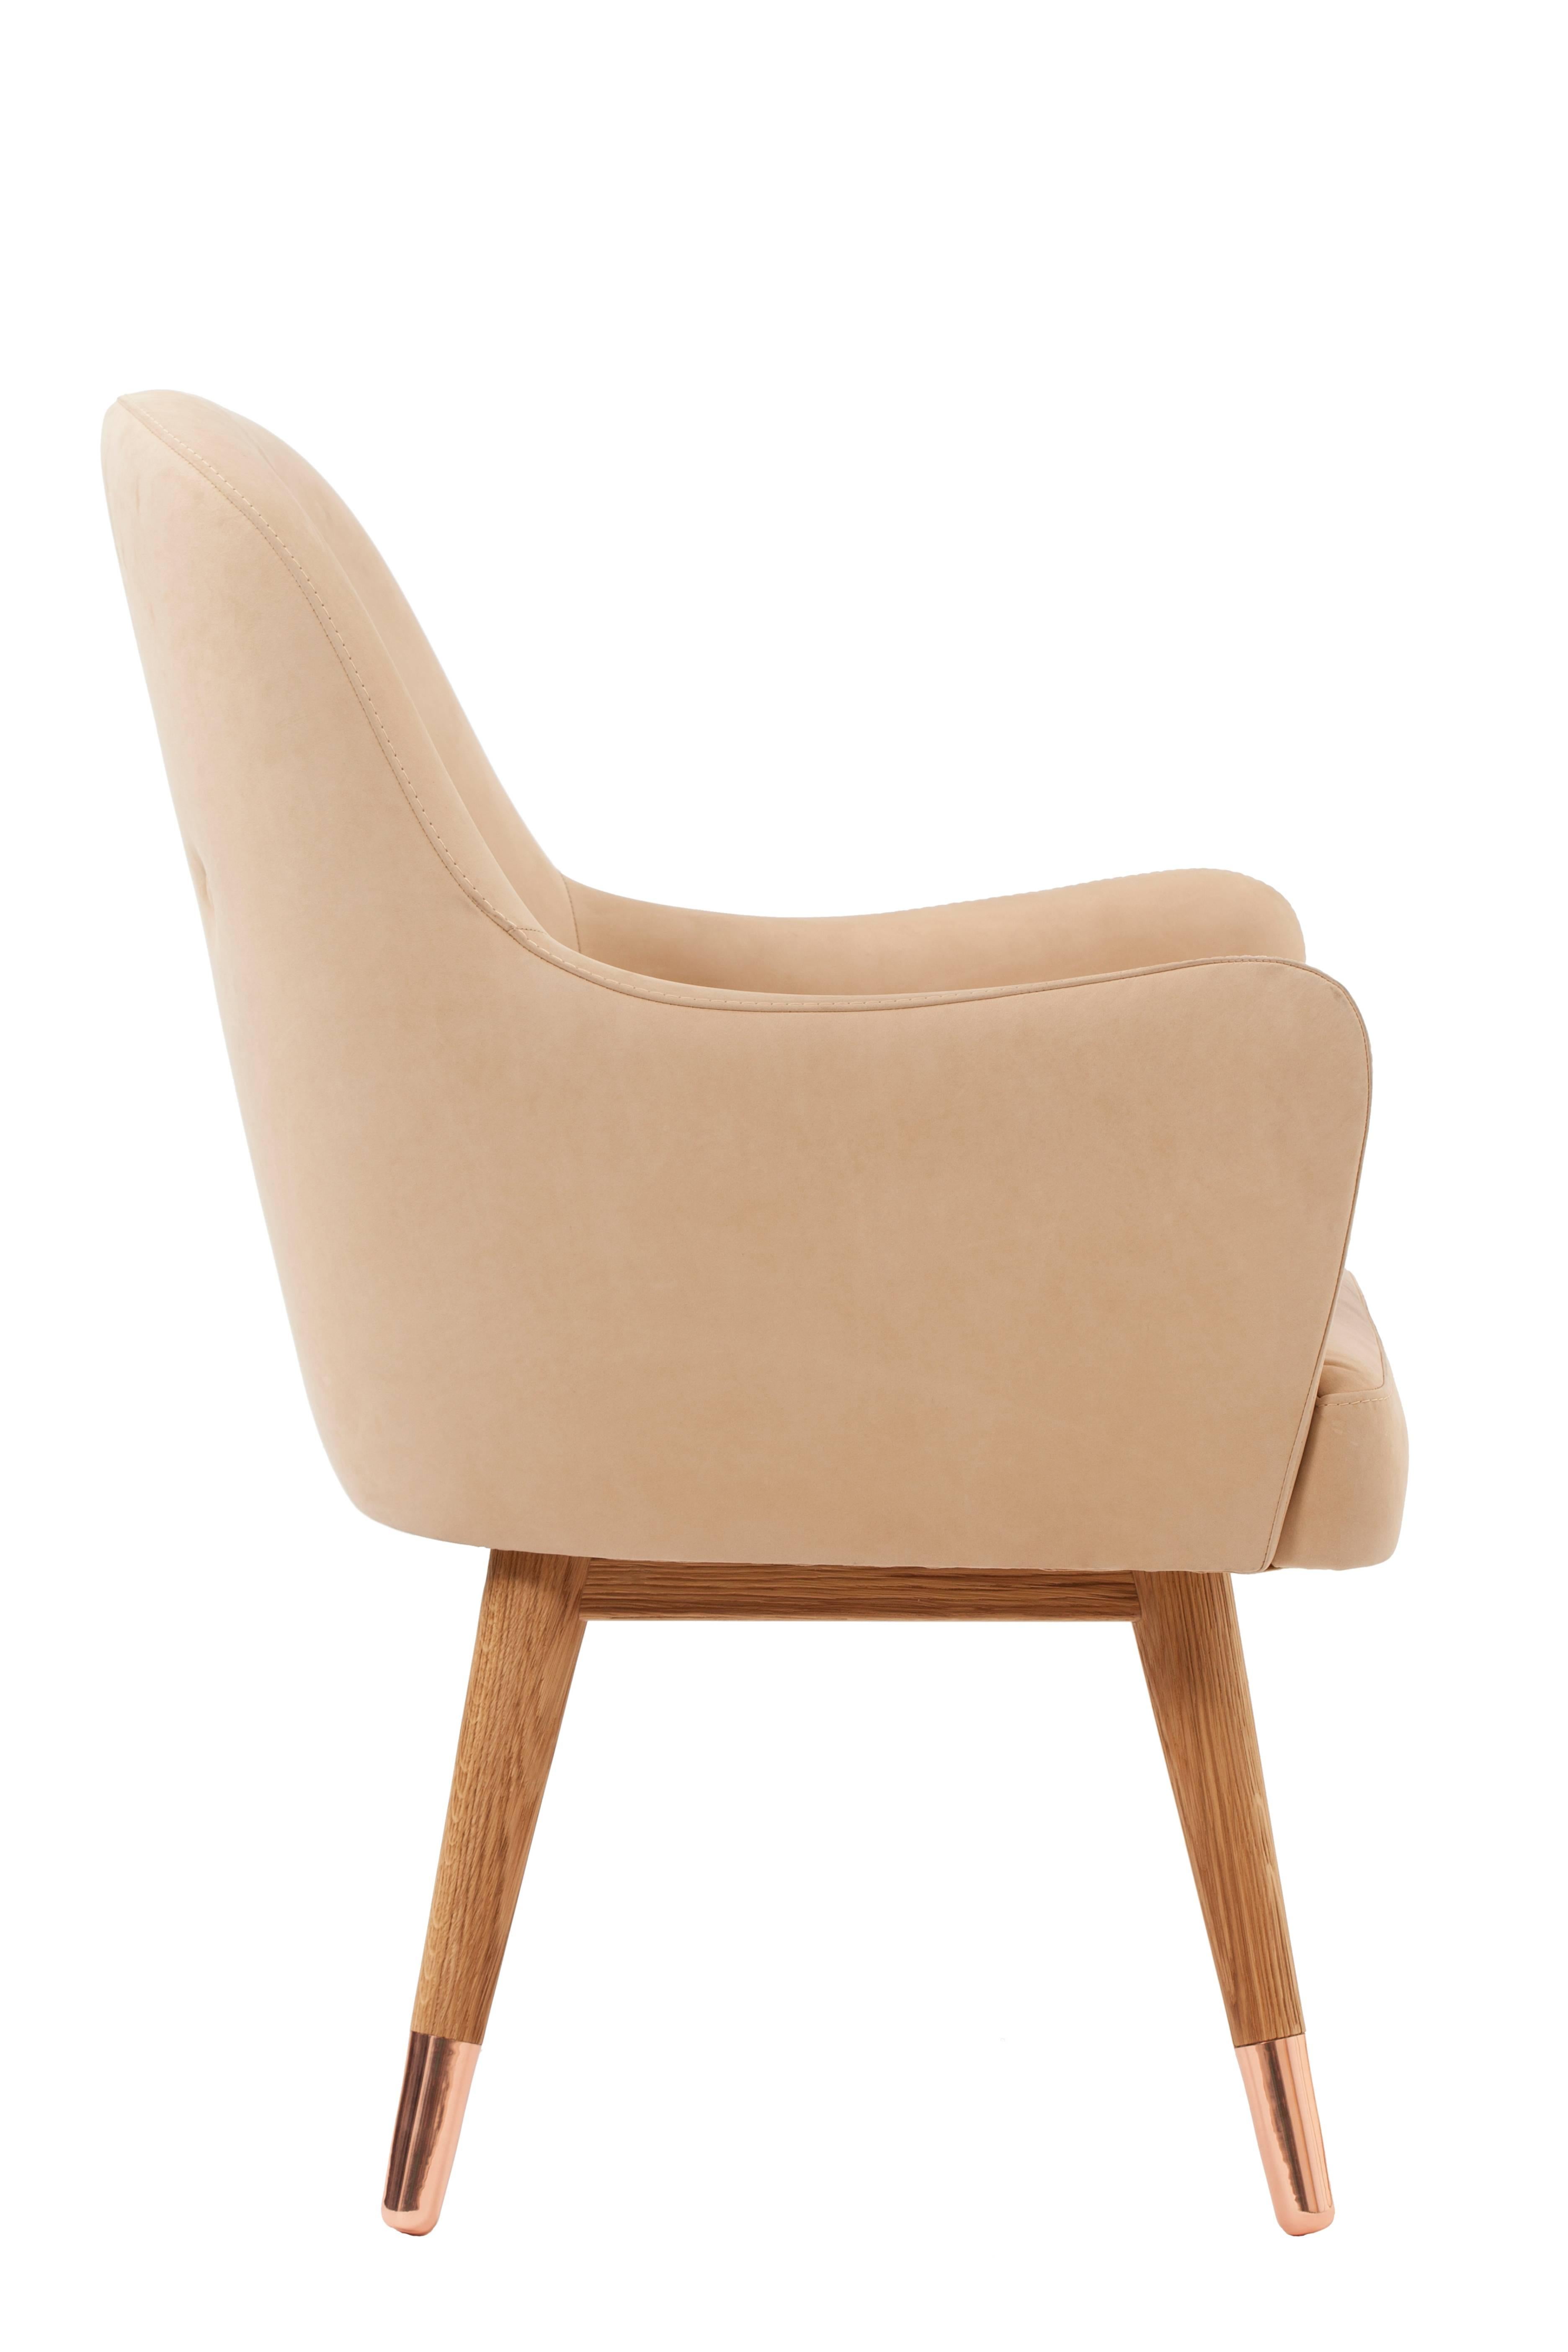 Dandy Beige Suede Leather Chair with American White Oak and Polished Copper (Poliert) im Angebot